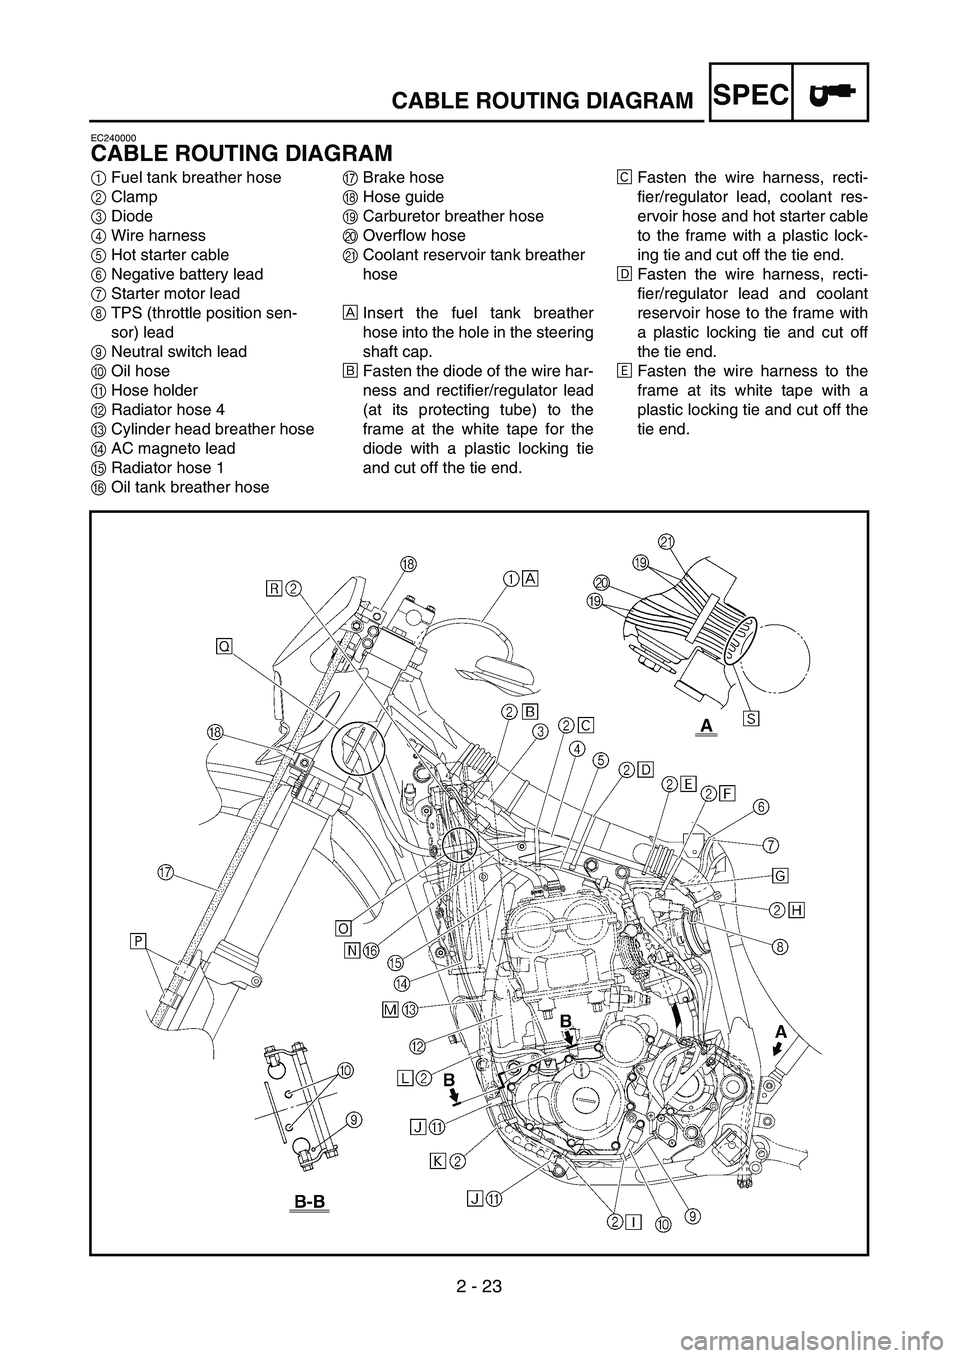 YAMAHA WR 450F 2004  Manuale de Empleo (in Spanish)  
2 - 23
SPEC
 
CABLE ROUTING DIAGRAM 
EC240000 
CABLE ROUTING DIAGRAM 
1 
Fuel tank breather hose 
2 
Clamp 
3 
Diode 
4 
Wire harness 
5 
Hot starter cable 
6 
Negative battery lead 
7 
Starter moto